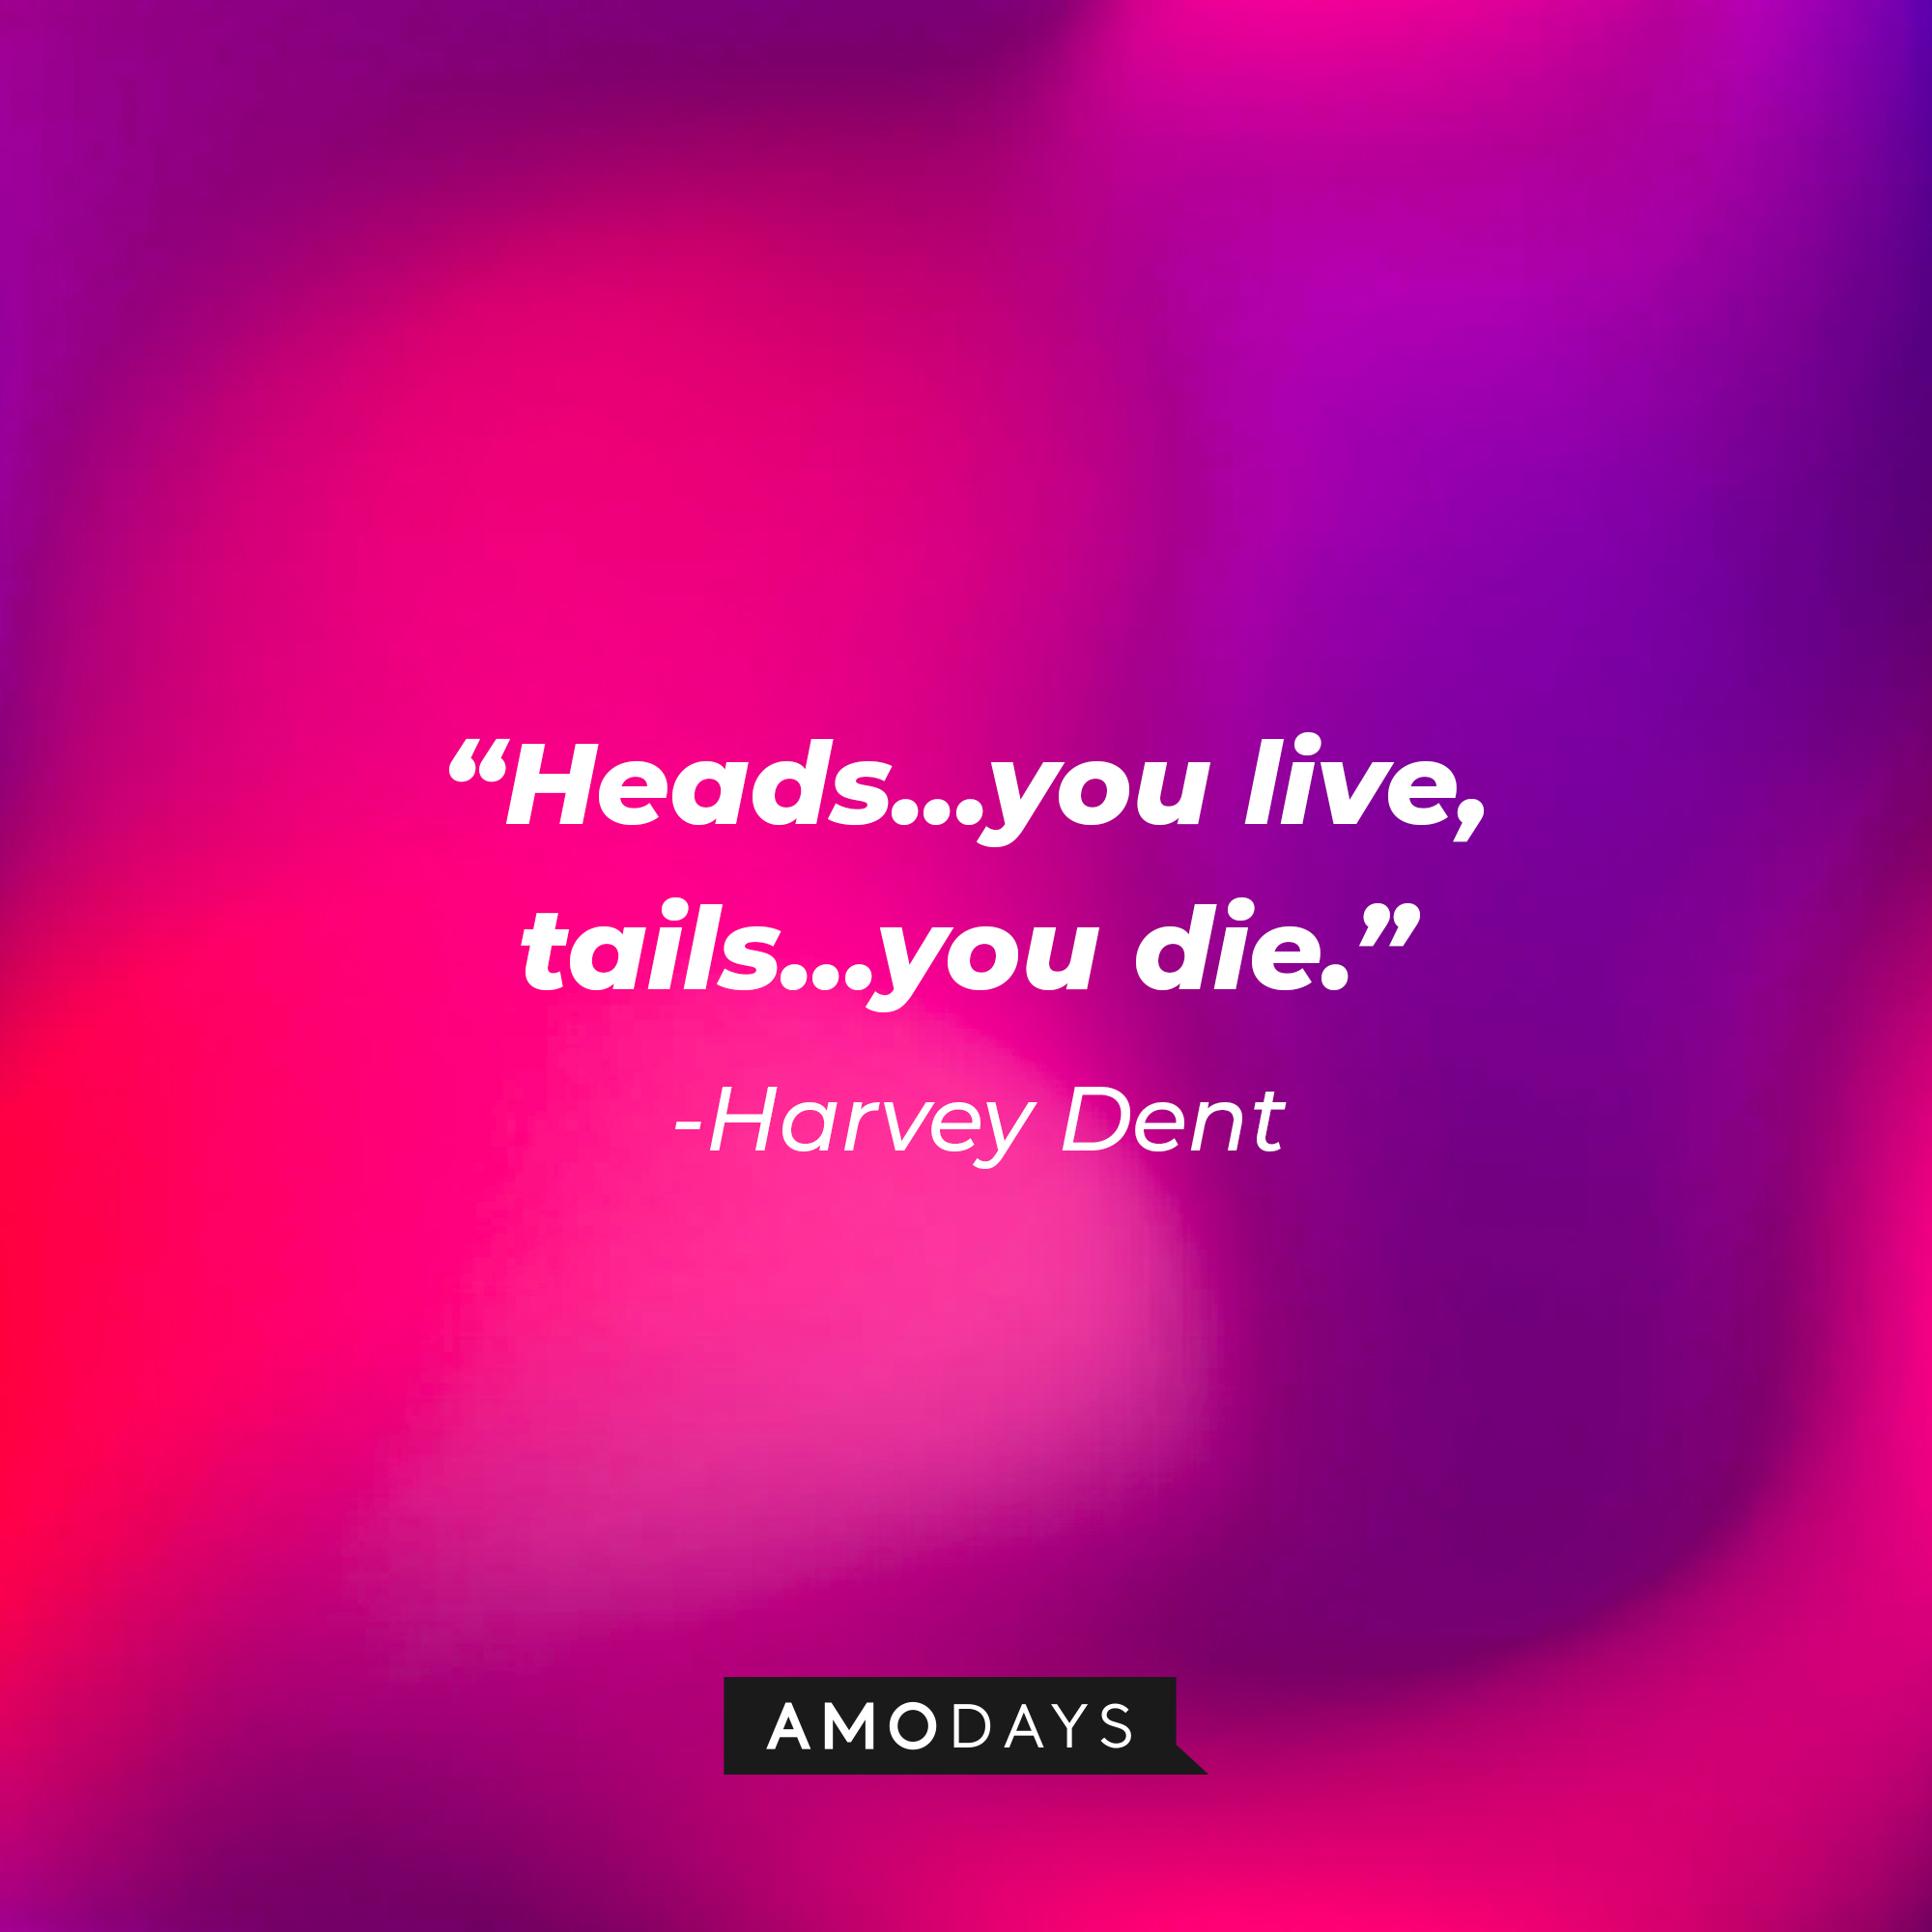 Harvey Dent's quote: “Heads...you live, tails...you die.” | Source: facebook.com/darkknighttrilogy